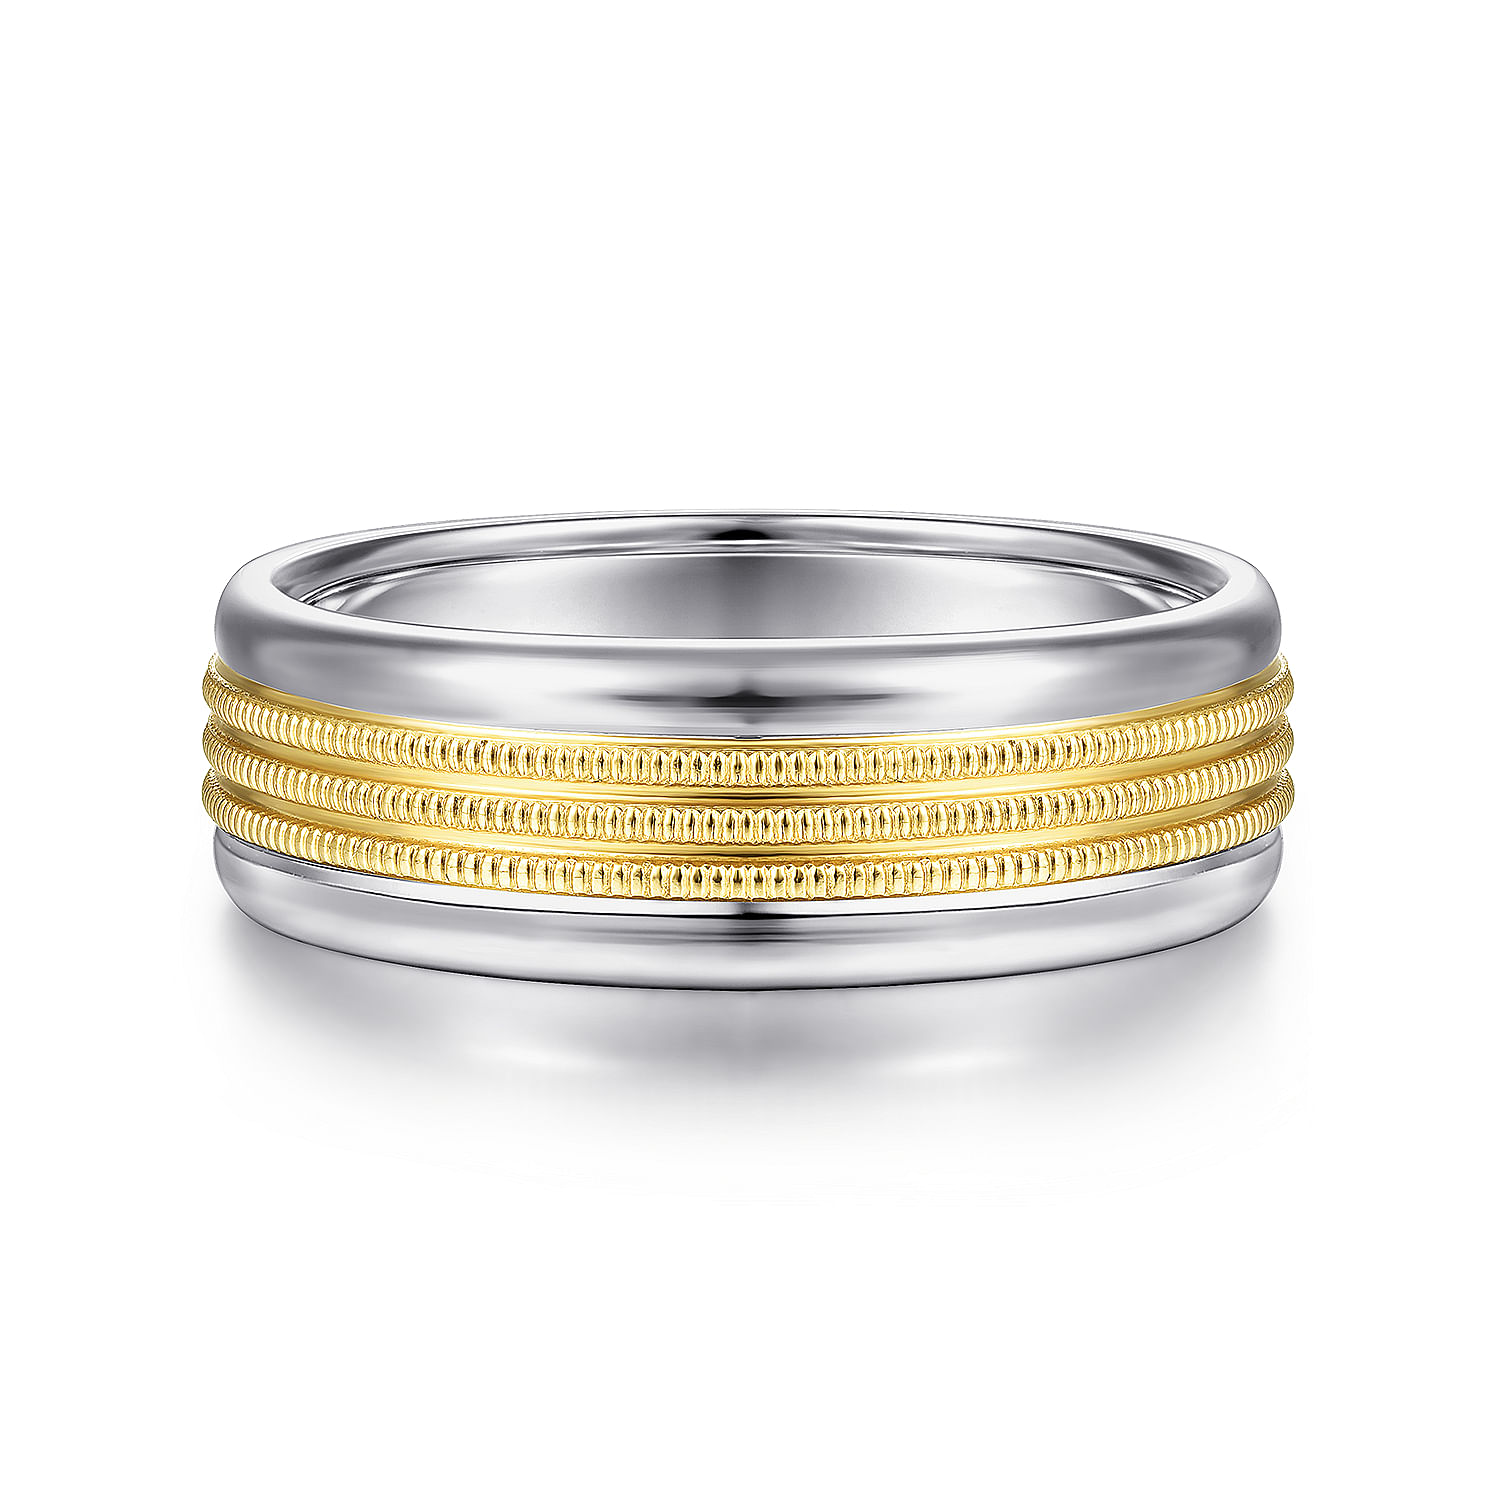 Ethan---14K-White-Yellow-Gold-7mm---Two-Tone-Men's-Wedding-Band-in-High-Polished-Finish1